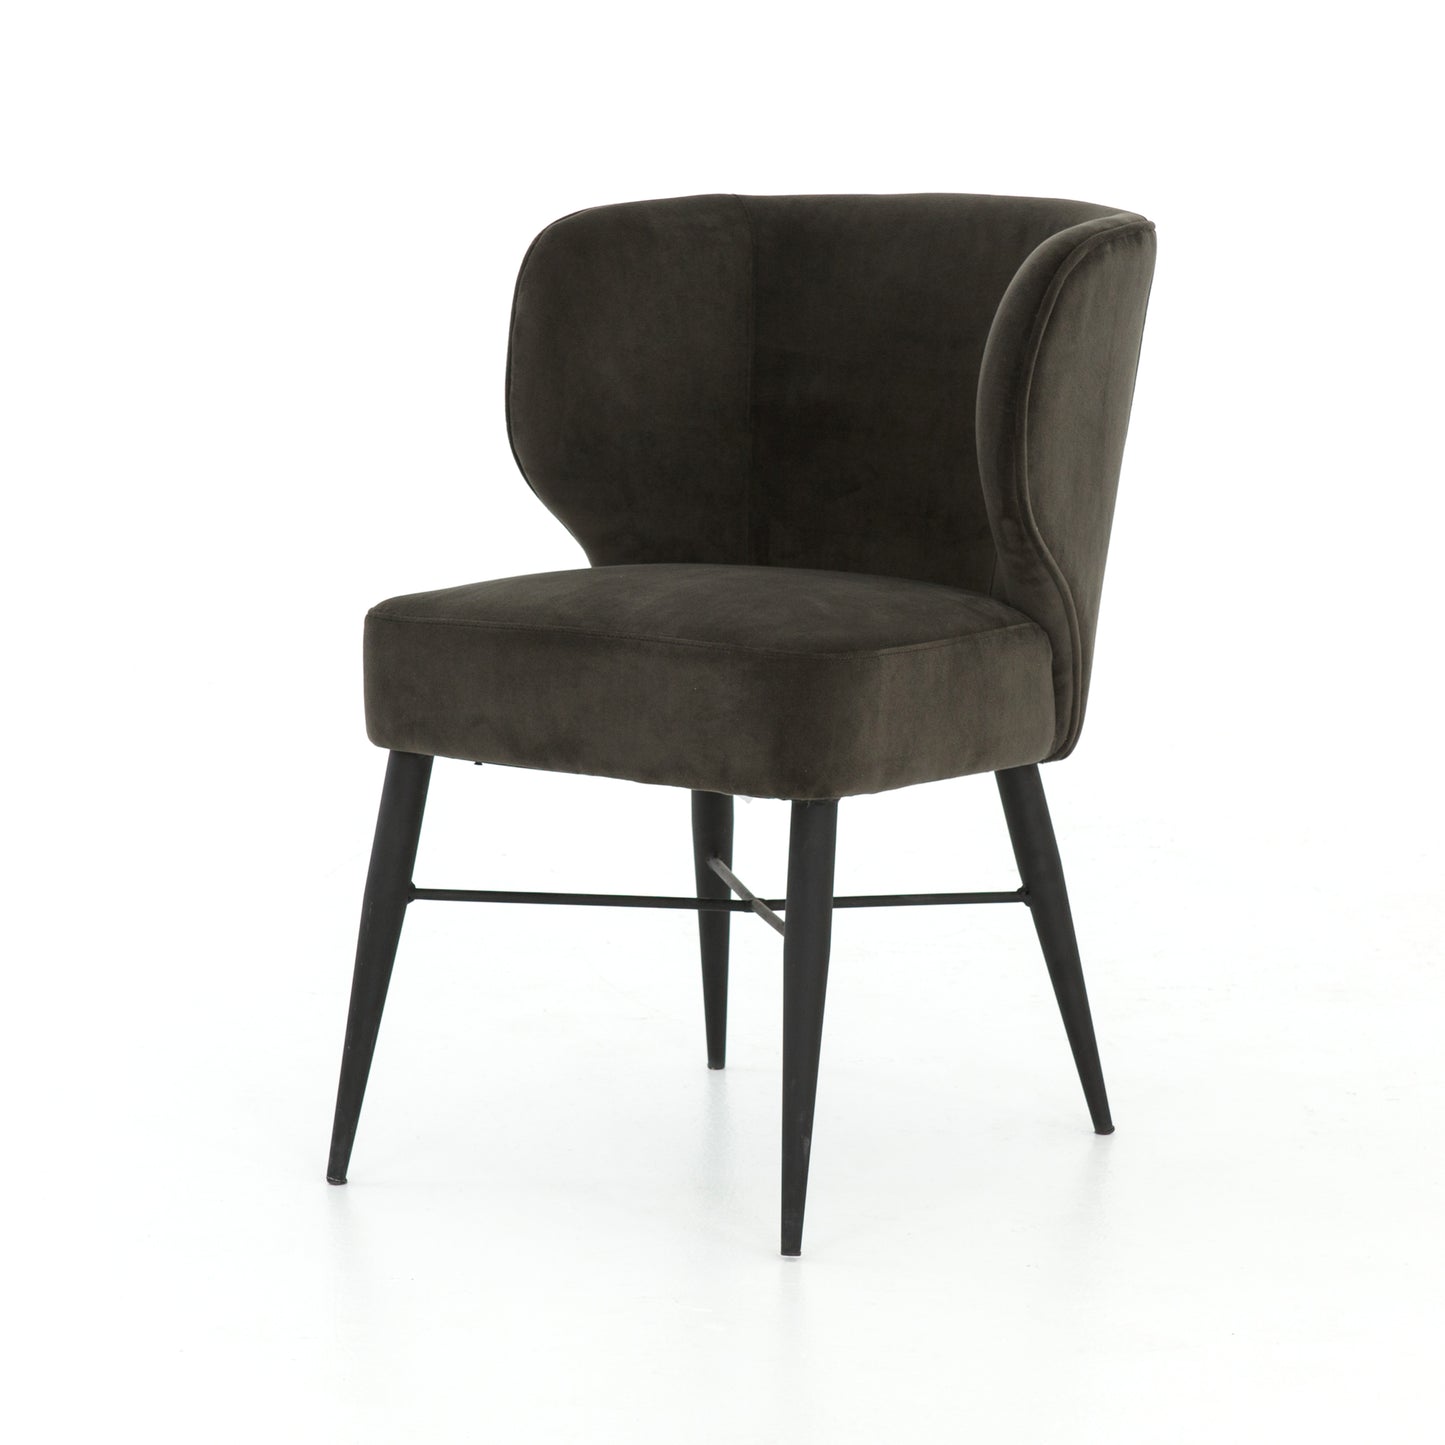 Load image into Gallery viewer, Arianna Dining Chair - Bella Smoke Dining Chair Four Hands     Four Hands, Mid Century Modern Furniture, Old Bones Furniture Company, Old Bones Co, Modern Mid Century, Designer Furniture, https://www.oldbonesco.com/
